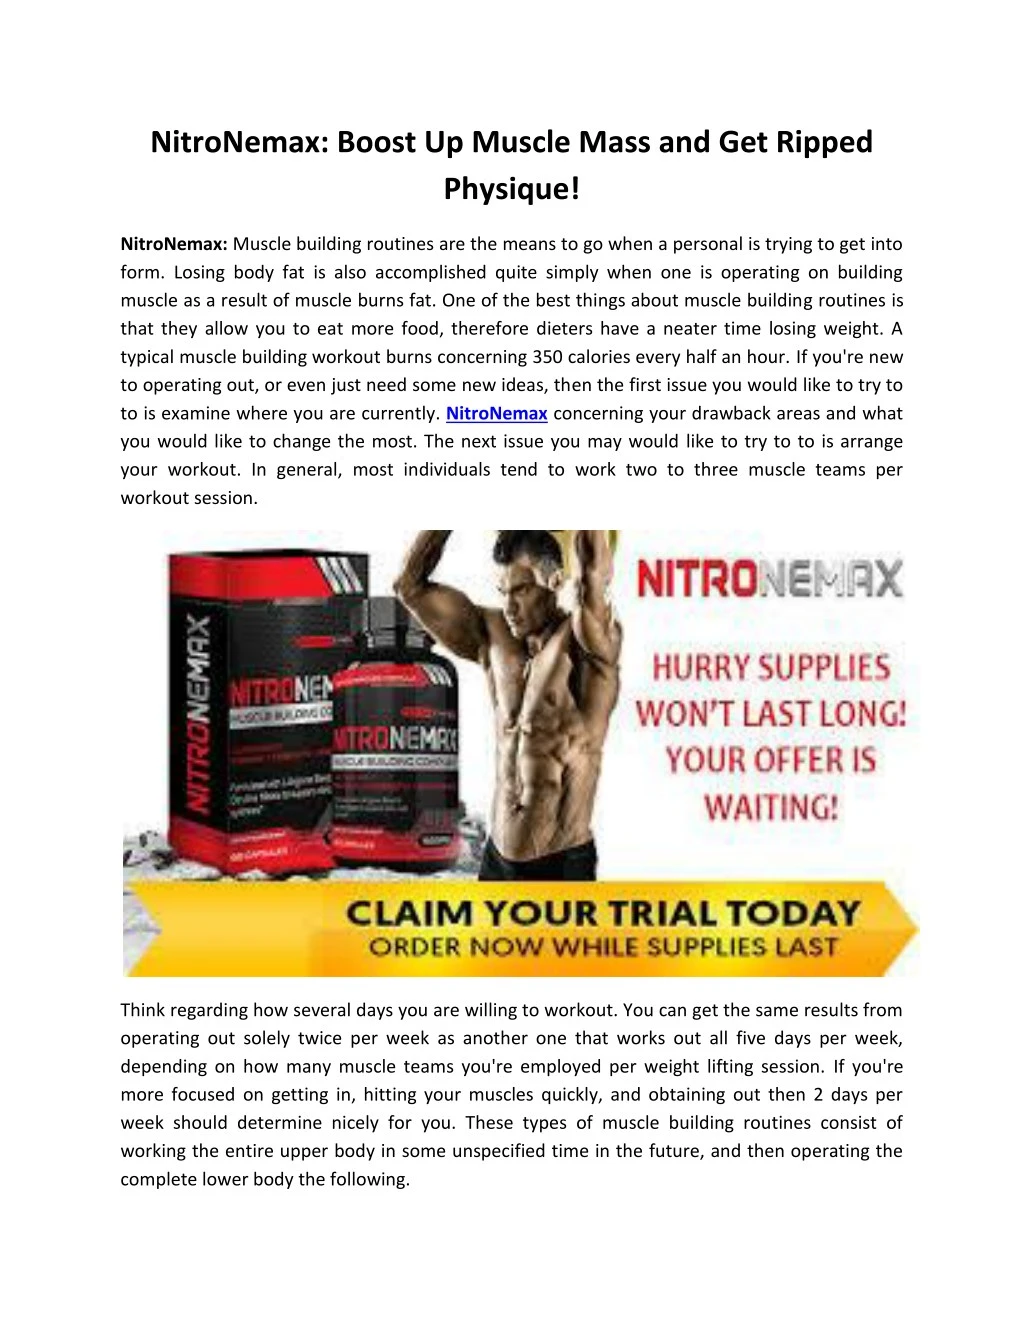 nitronemax boost up muscle mass and get ripped